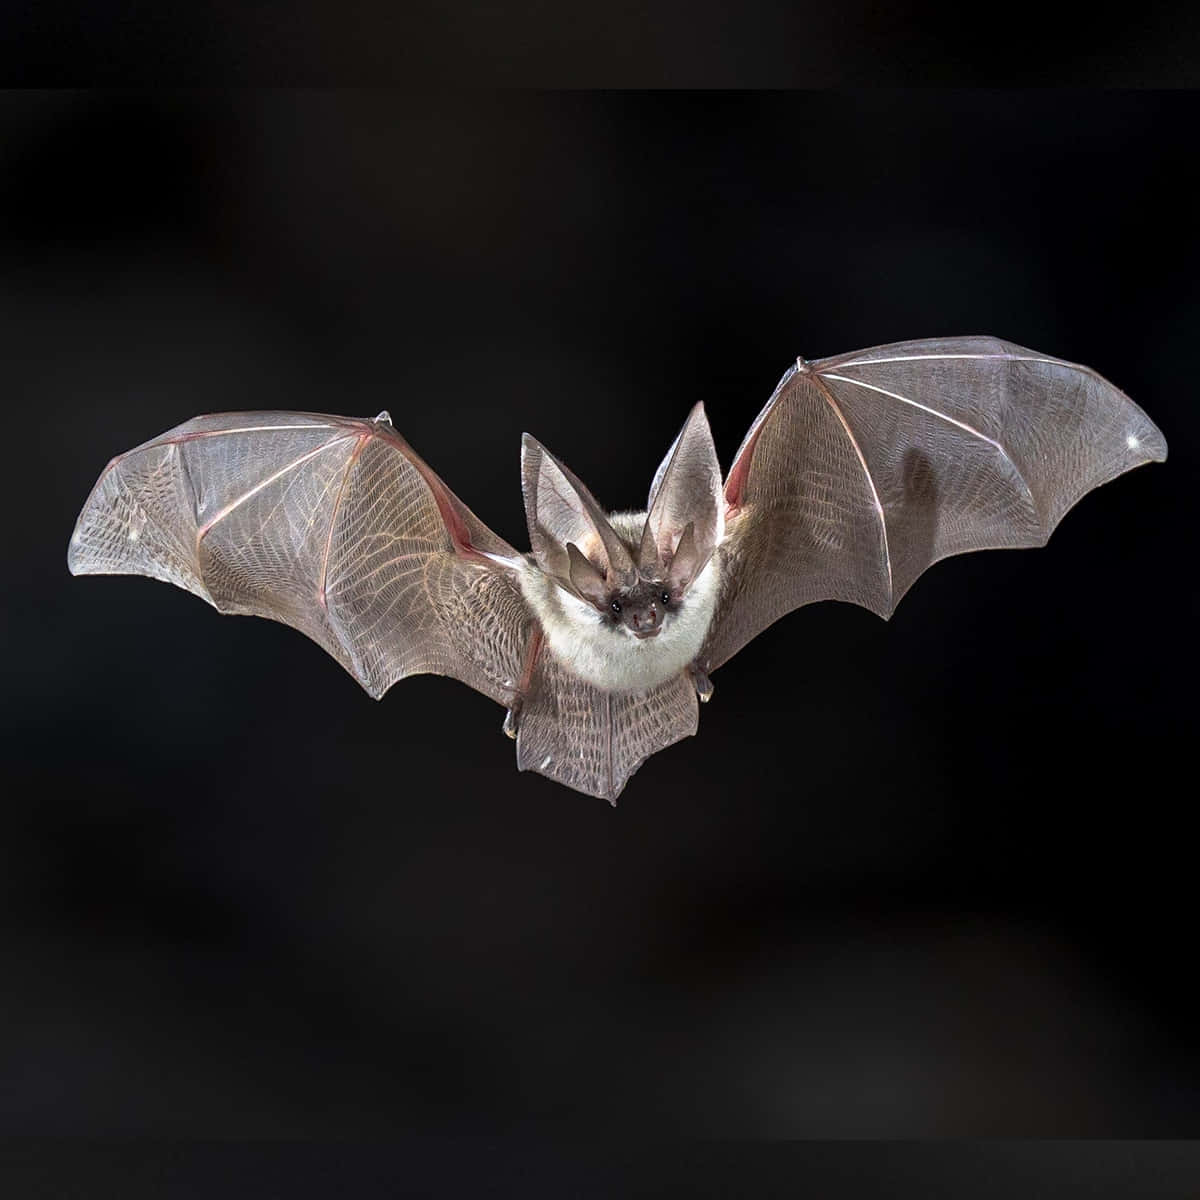 Cute Flying Bat Pictures